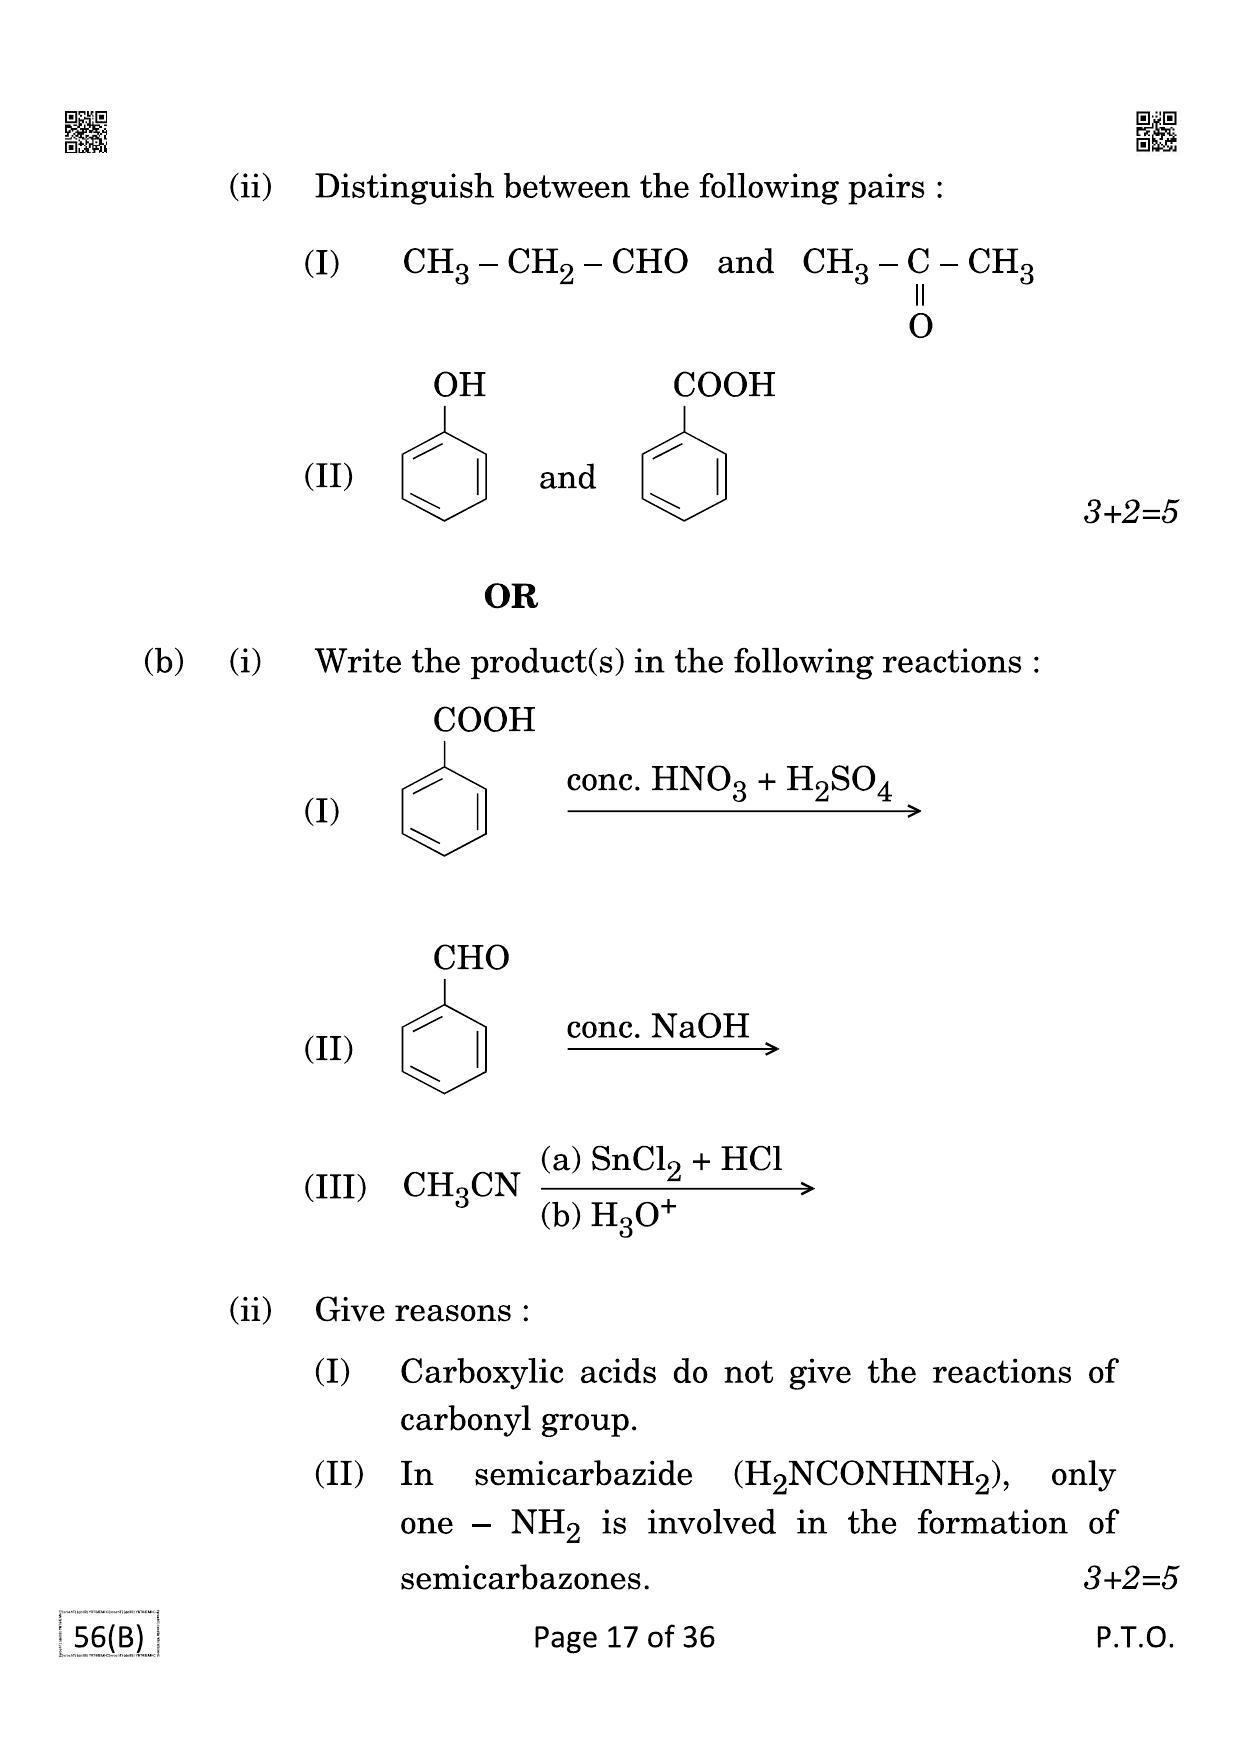 CBSE Class 12 QP_043_CHEMISTRY_FOR_BLIND_CANDIDATES 2021 Compartment Question Paper - Page 17